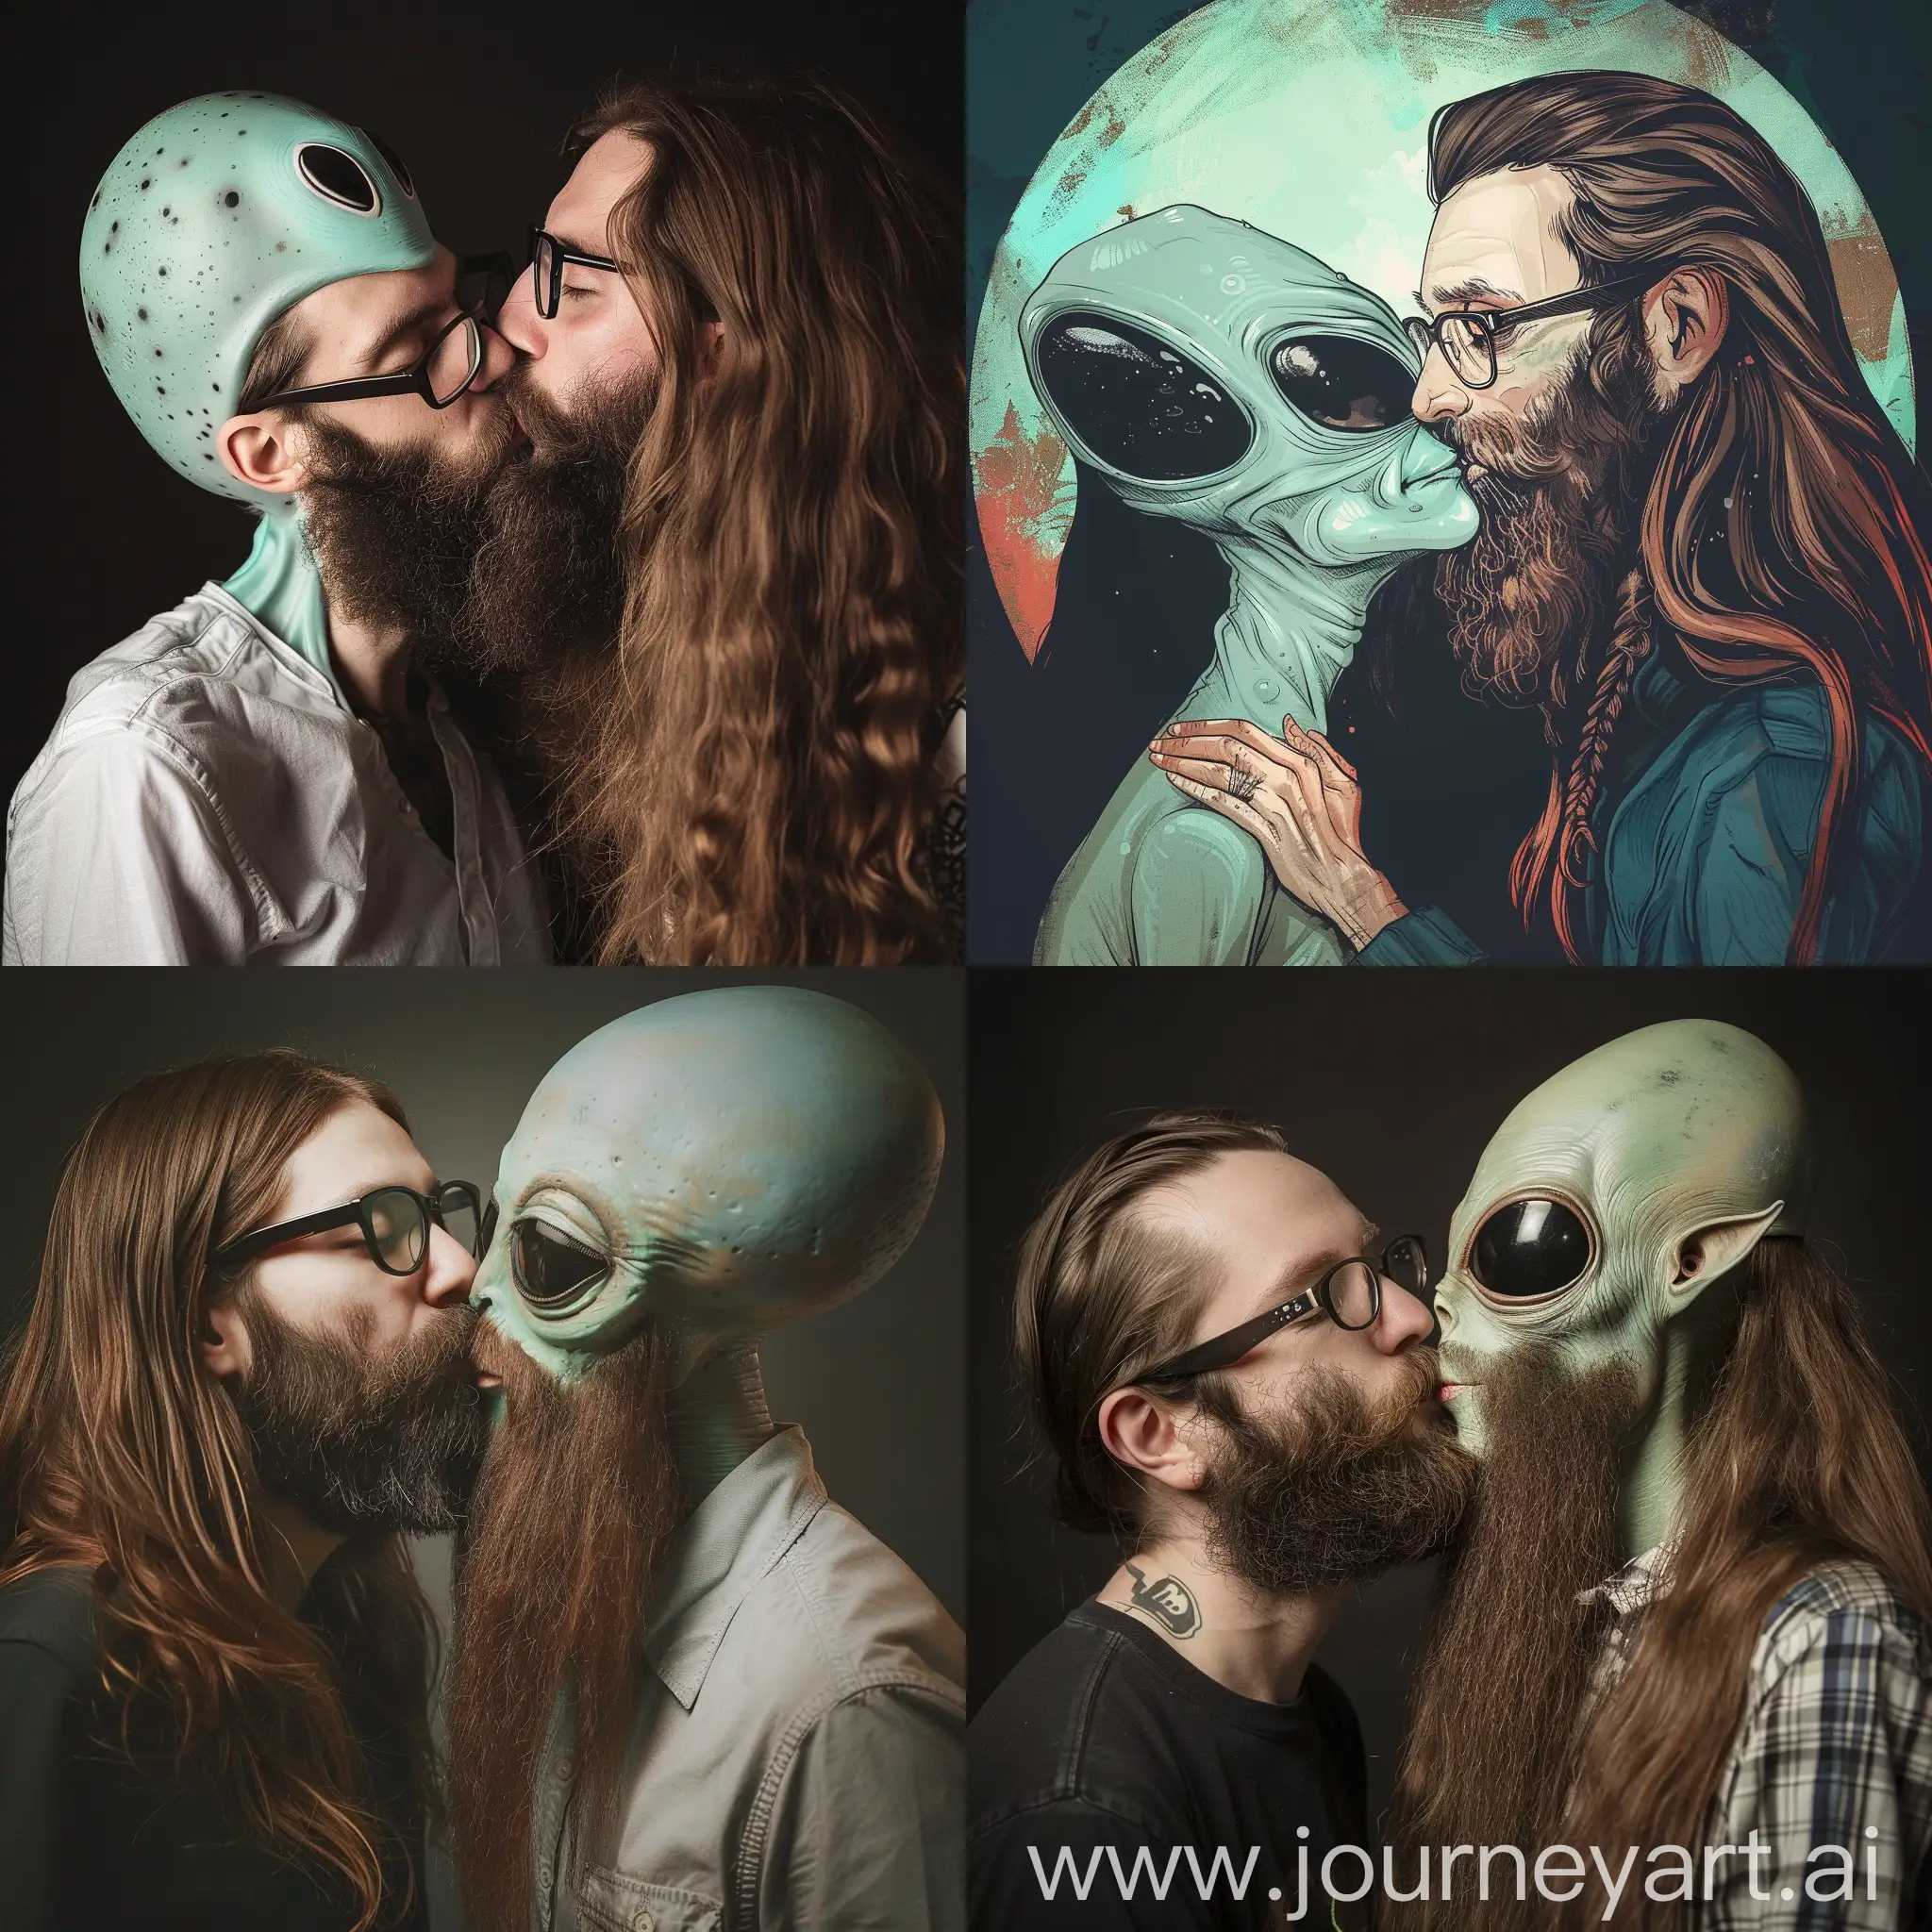 Affectionate-Encounter-LongHaired-Man-with-Brown-Beard-and-Glasses-Kissing-Alien